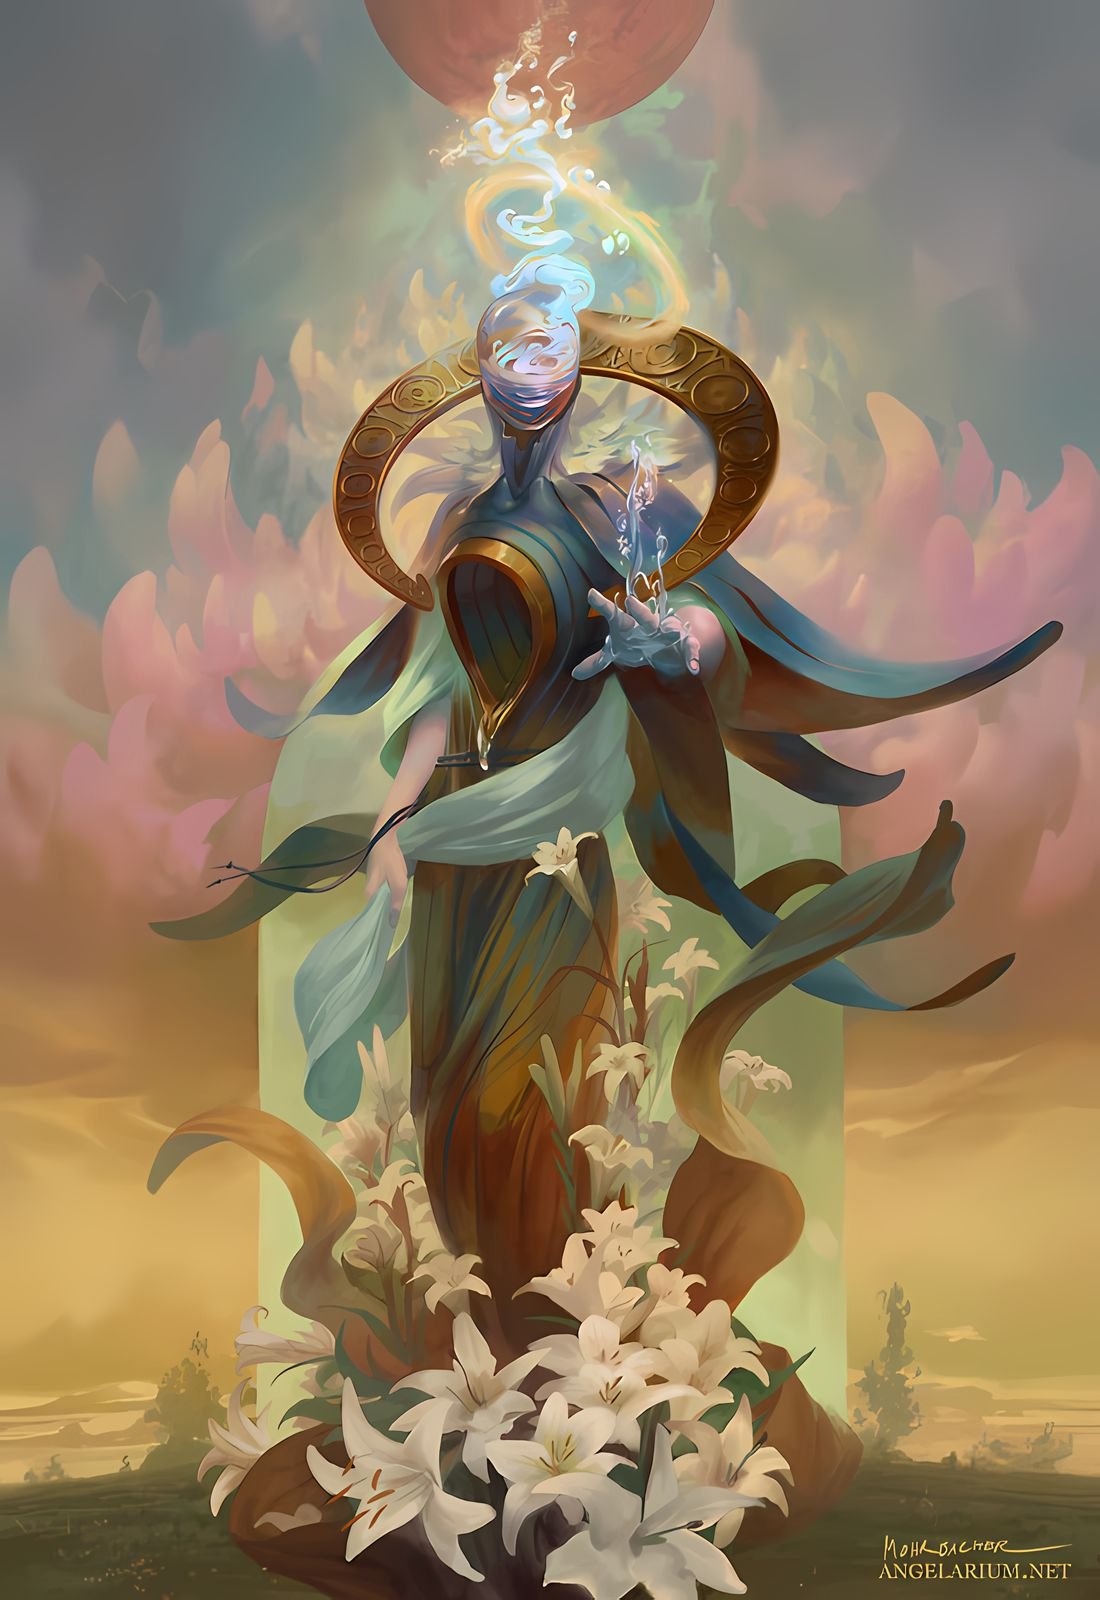 Peter Mohrbacher Blends Surrealism With Fantasy To Create Powerful Magical Beings (1)